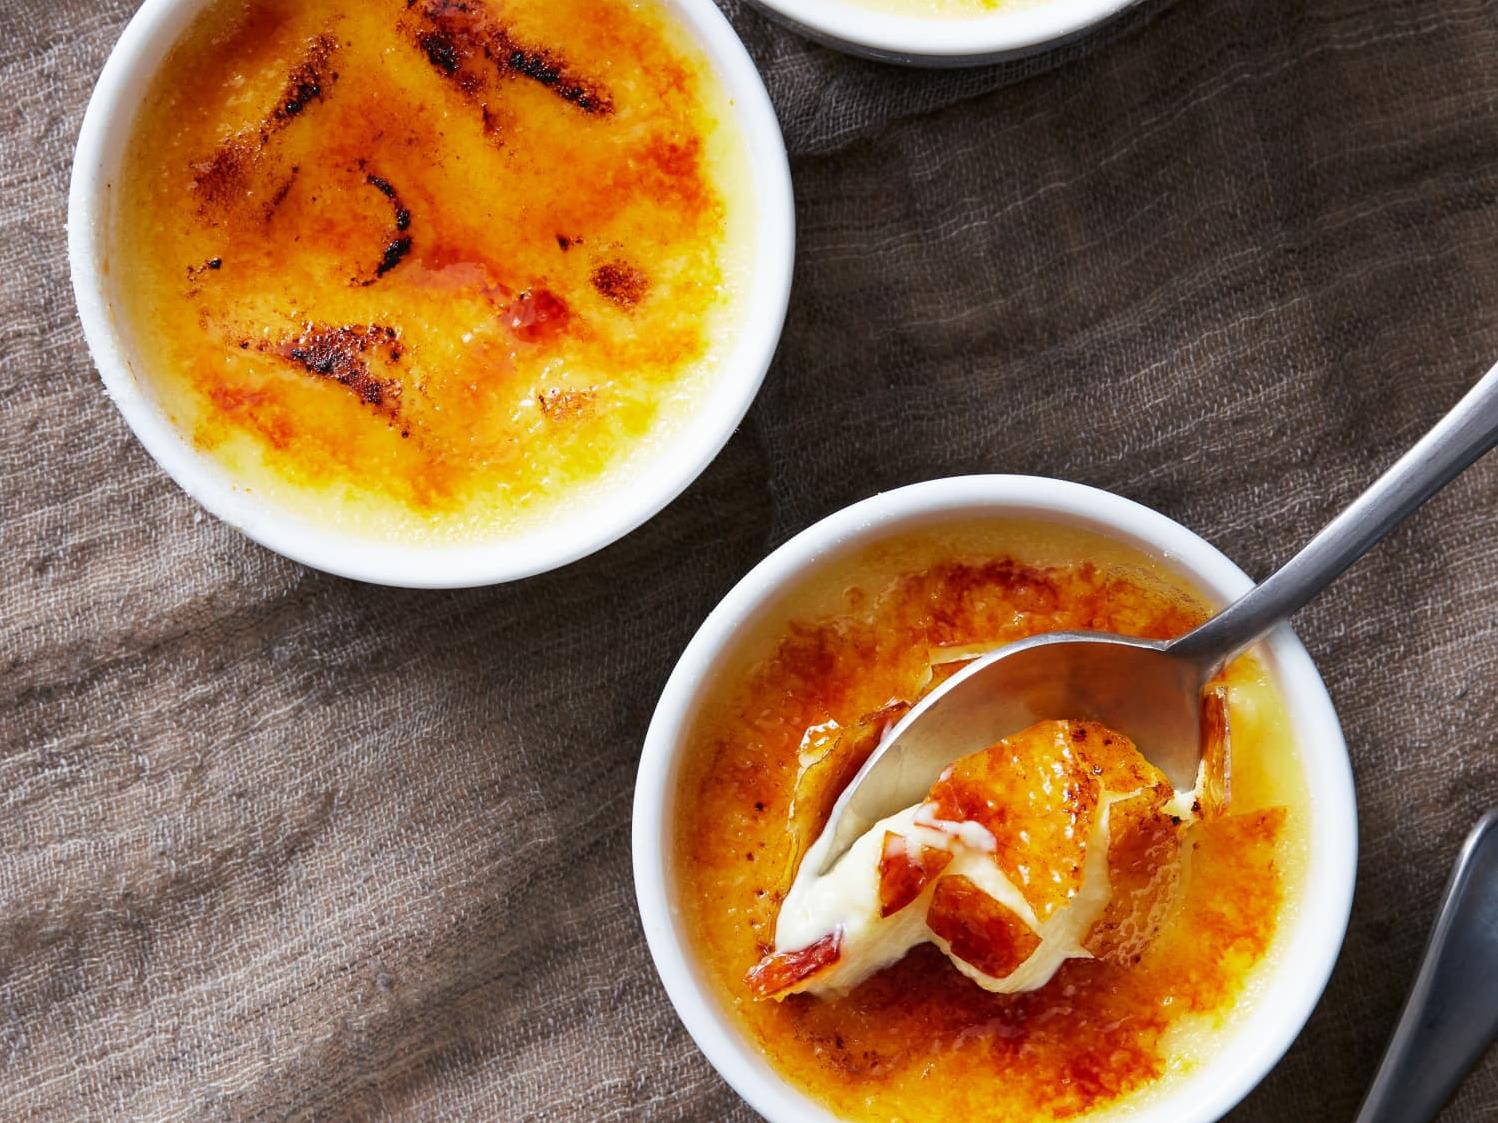  Can you smell the rich vanilla scent? That's your Creme Brulee caramelizing to perfection.